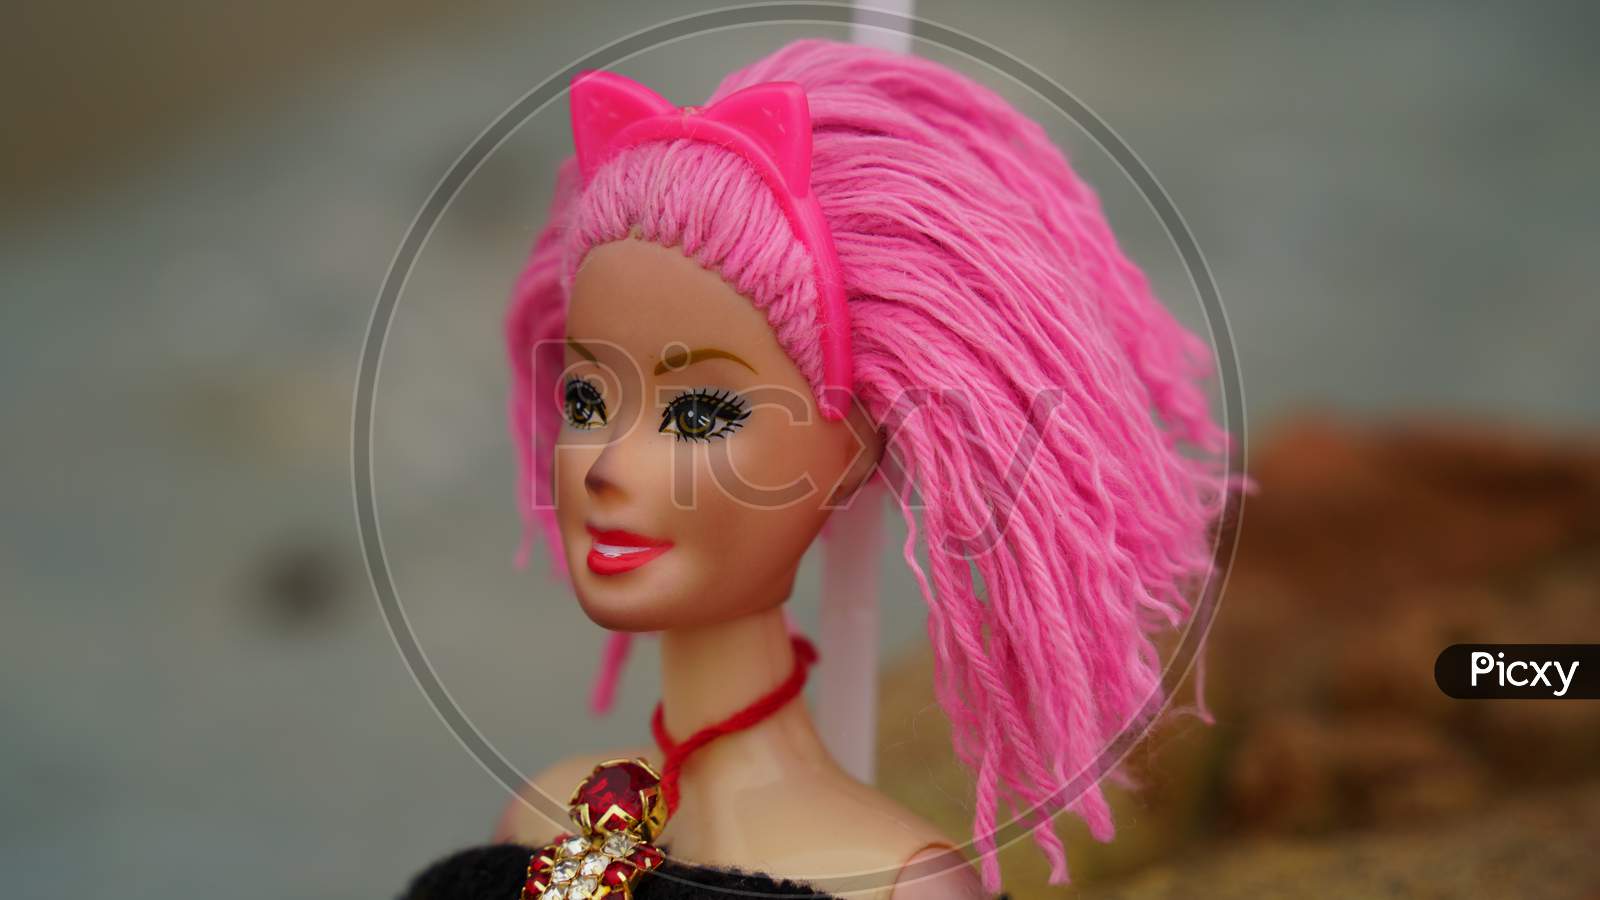 A Beautiful Barbie With Pink Hair. Awesome Doll.